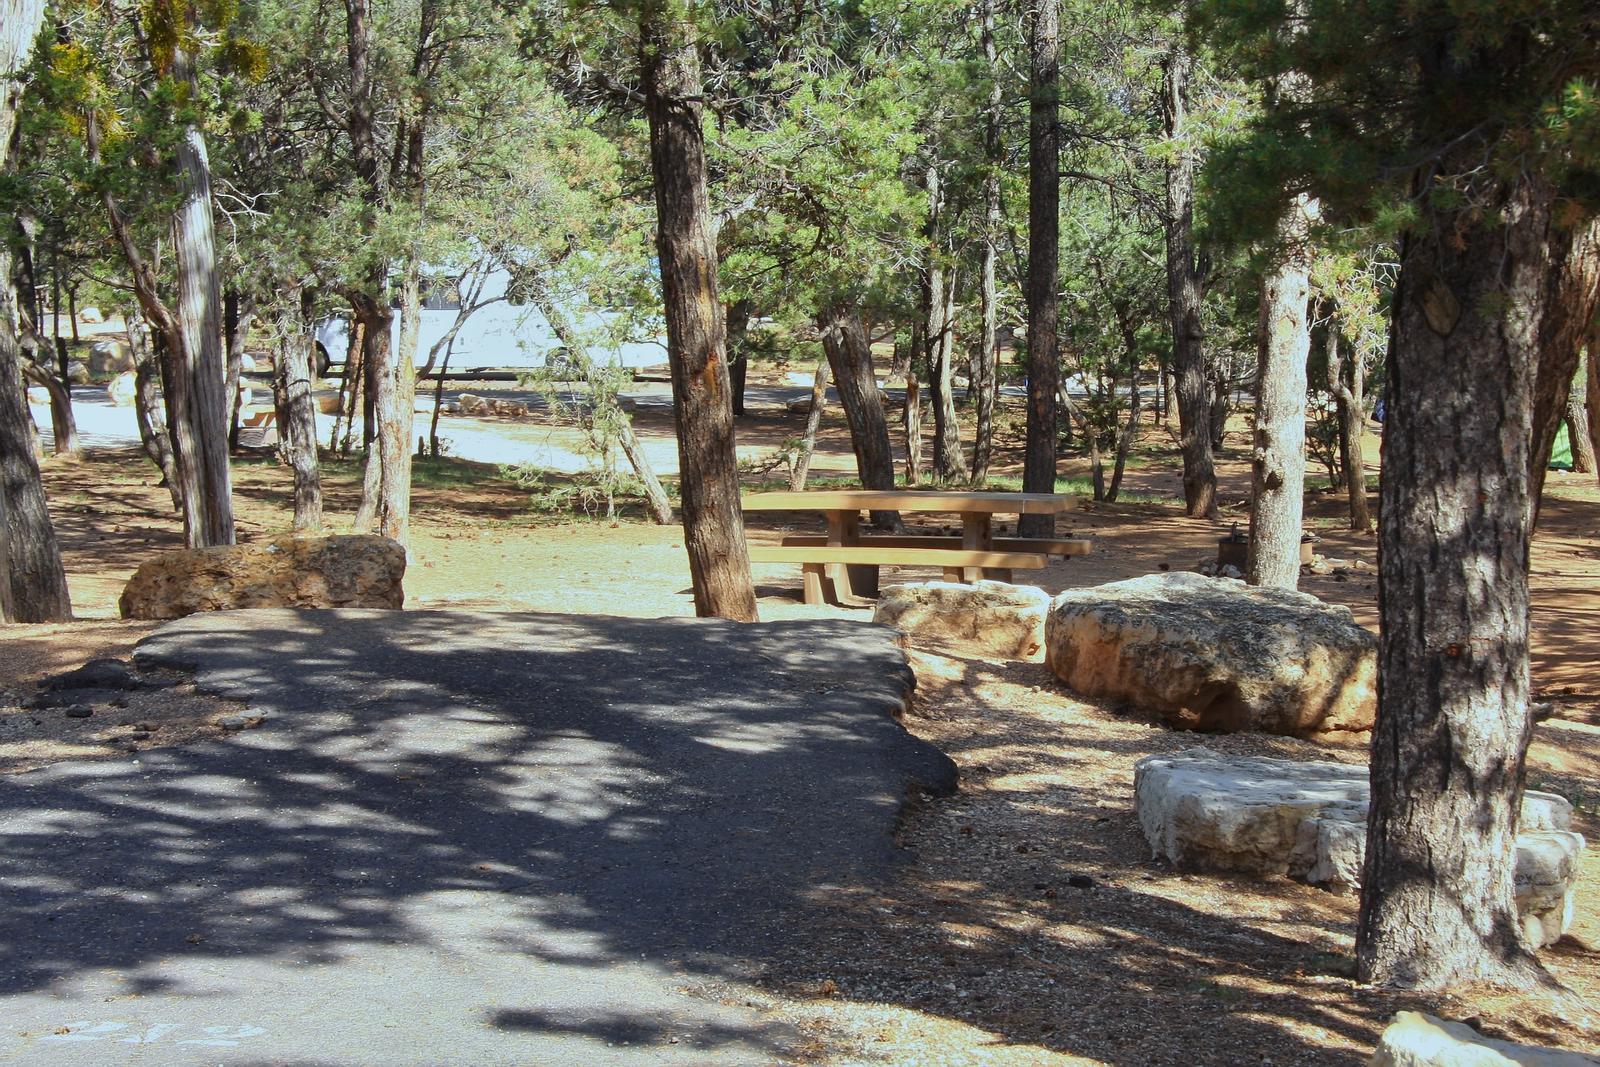 Picnic table, fire pit, and parking spot, Mather CampgroundPicnic table, fire pit, and parking spot for Oak Loop 212, Mather Campground